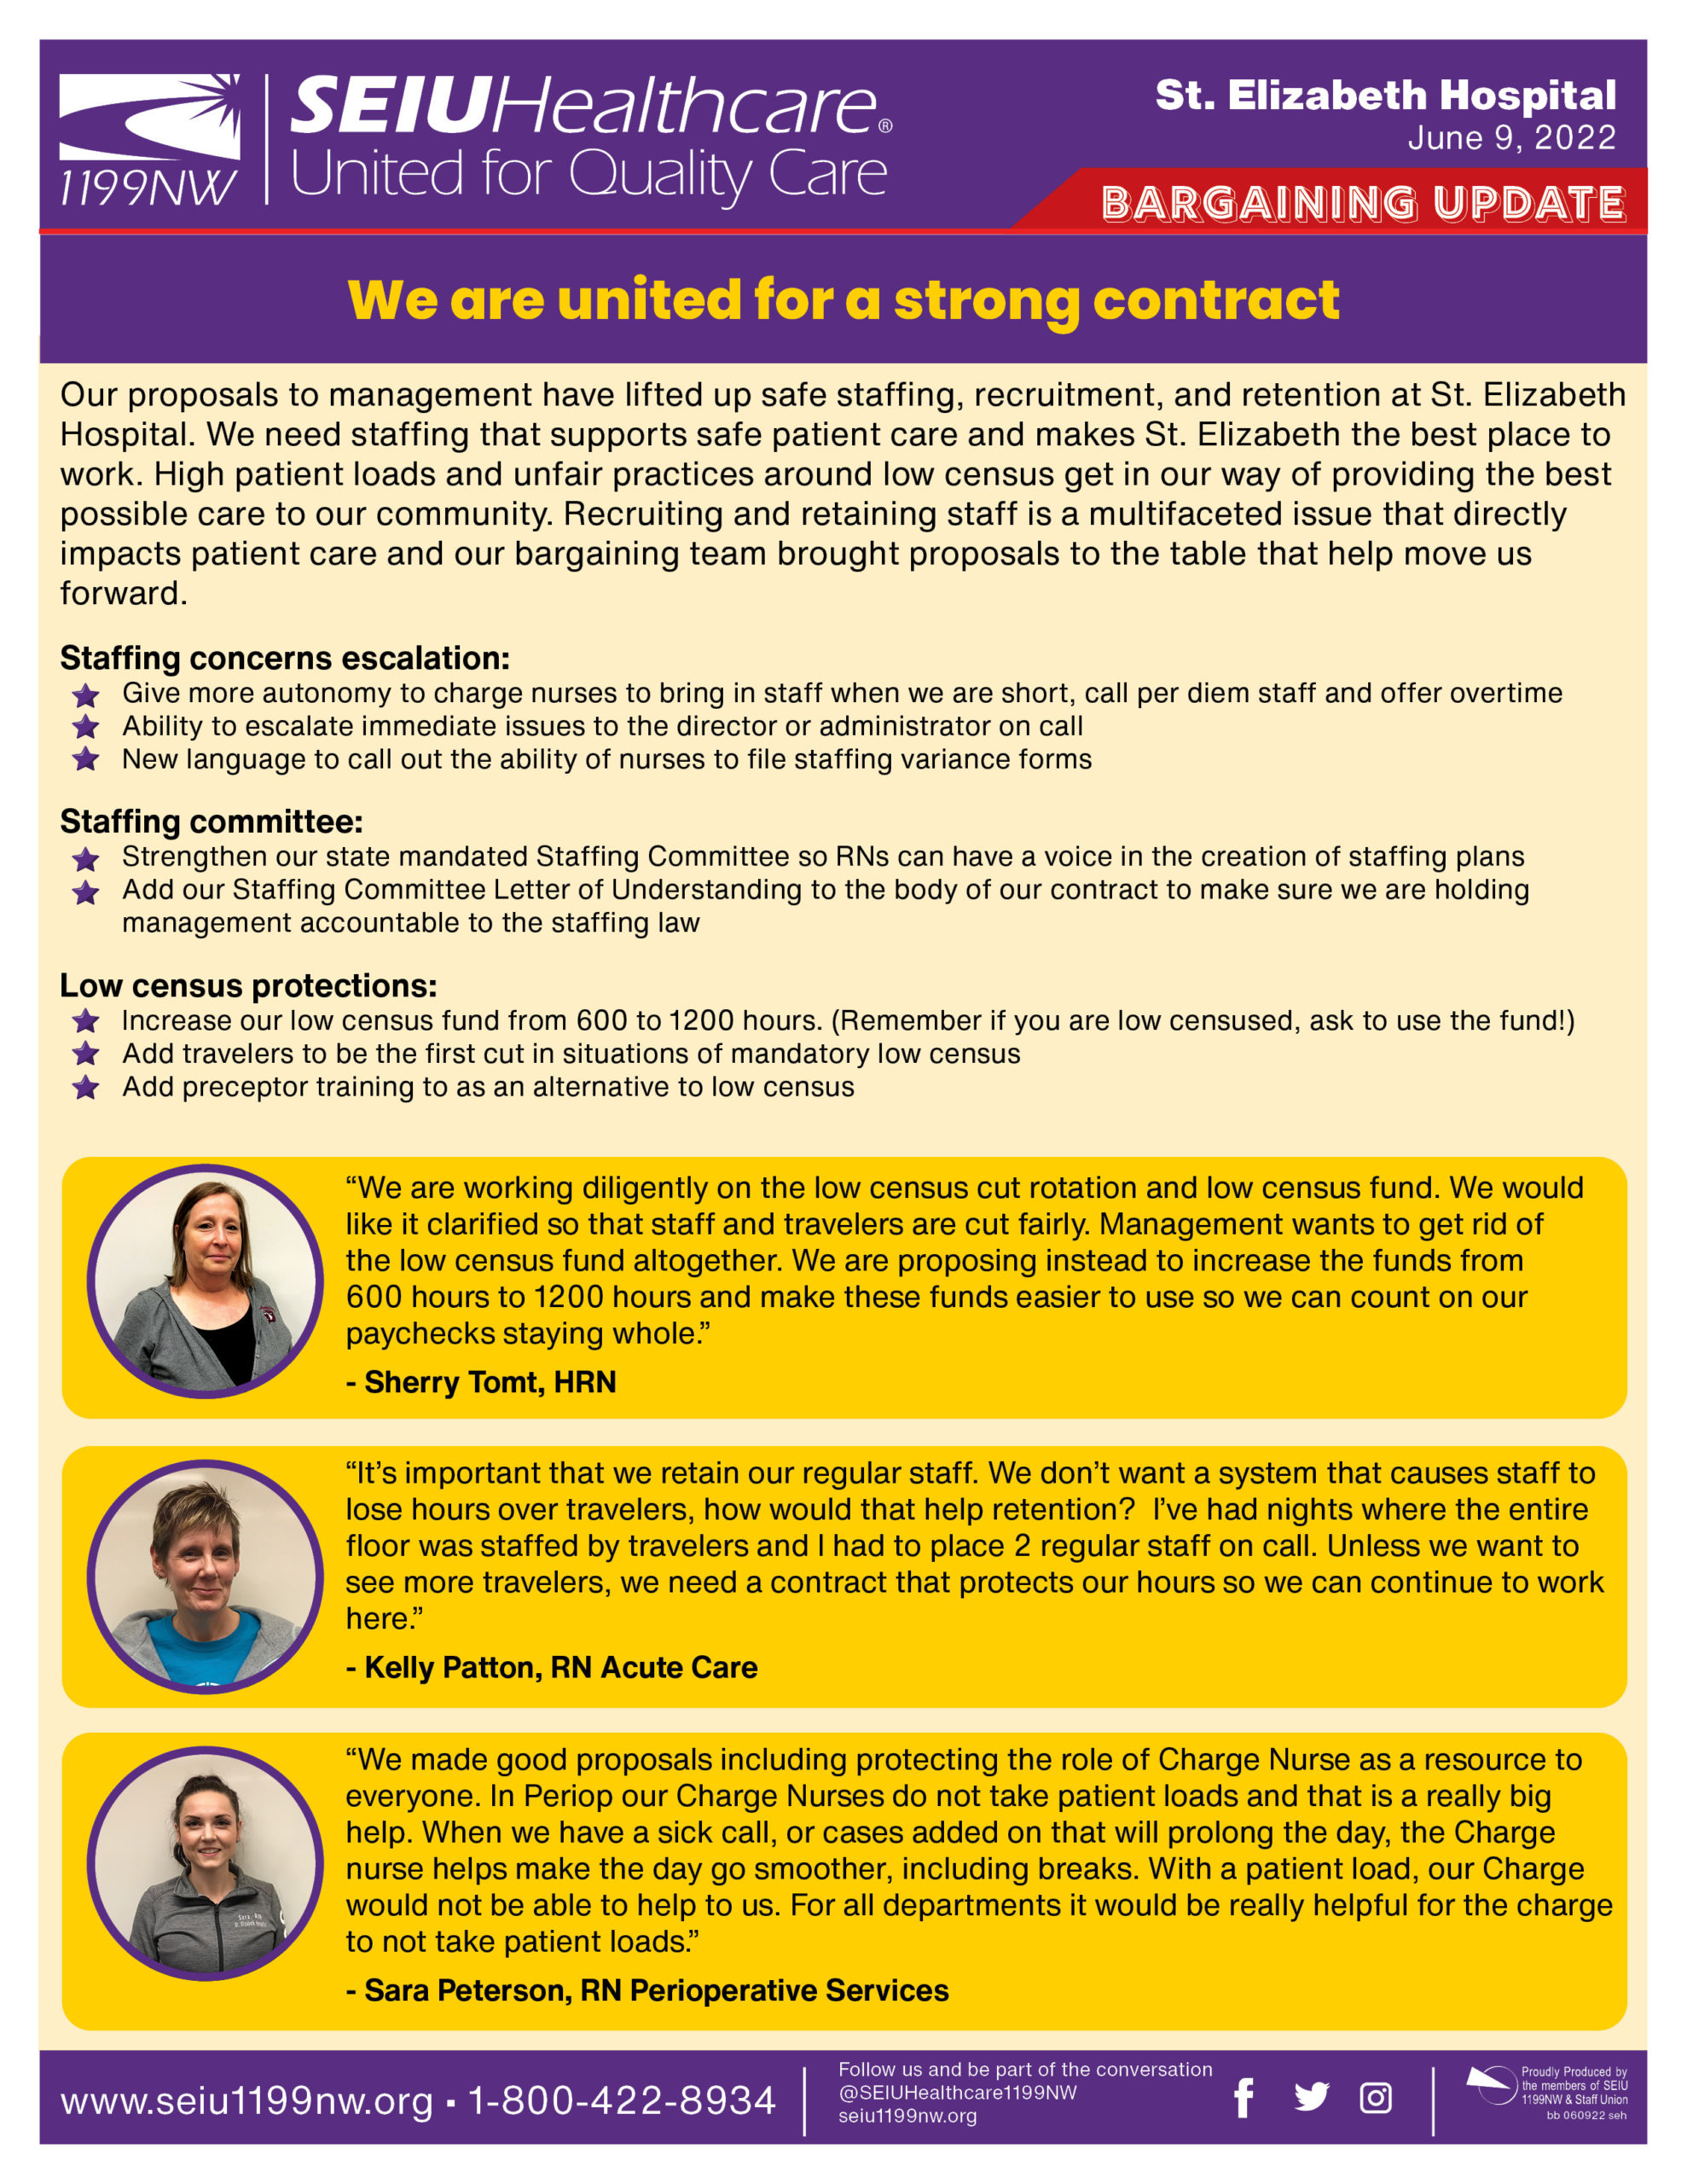 We are united for a strong contract